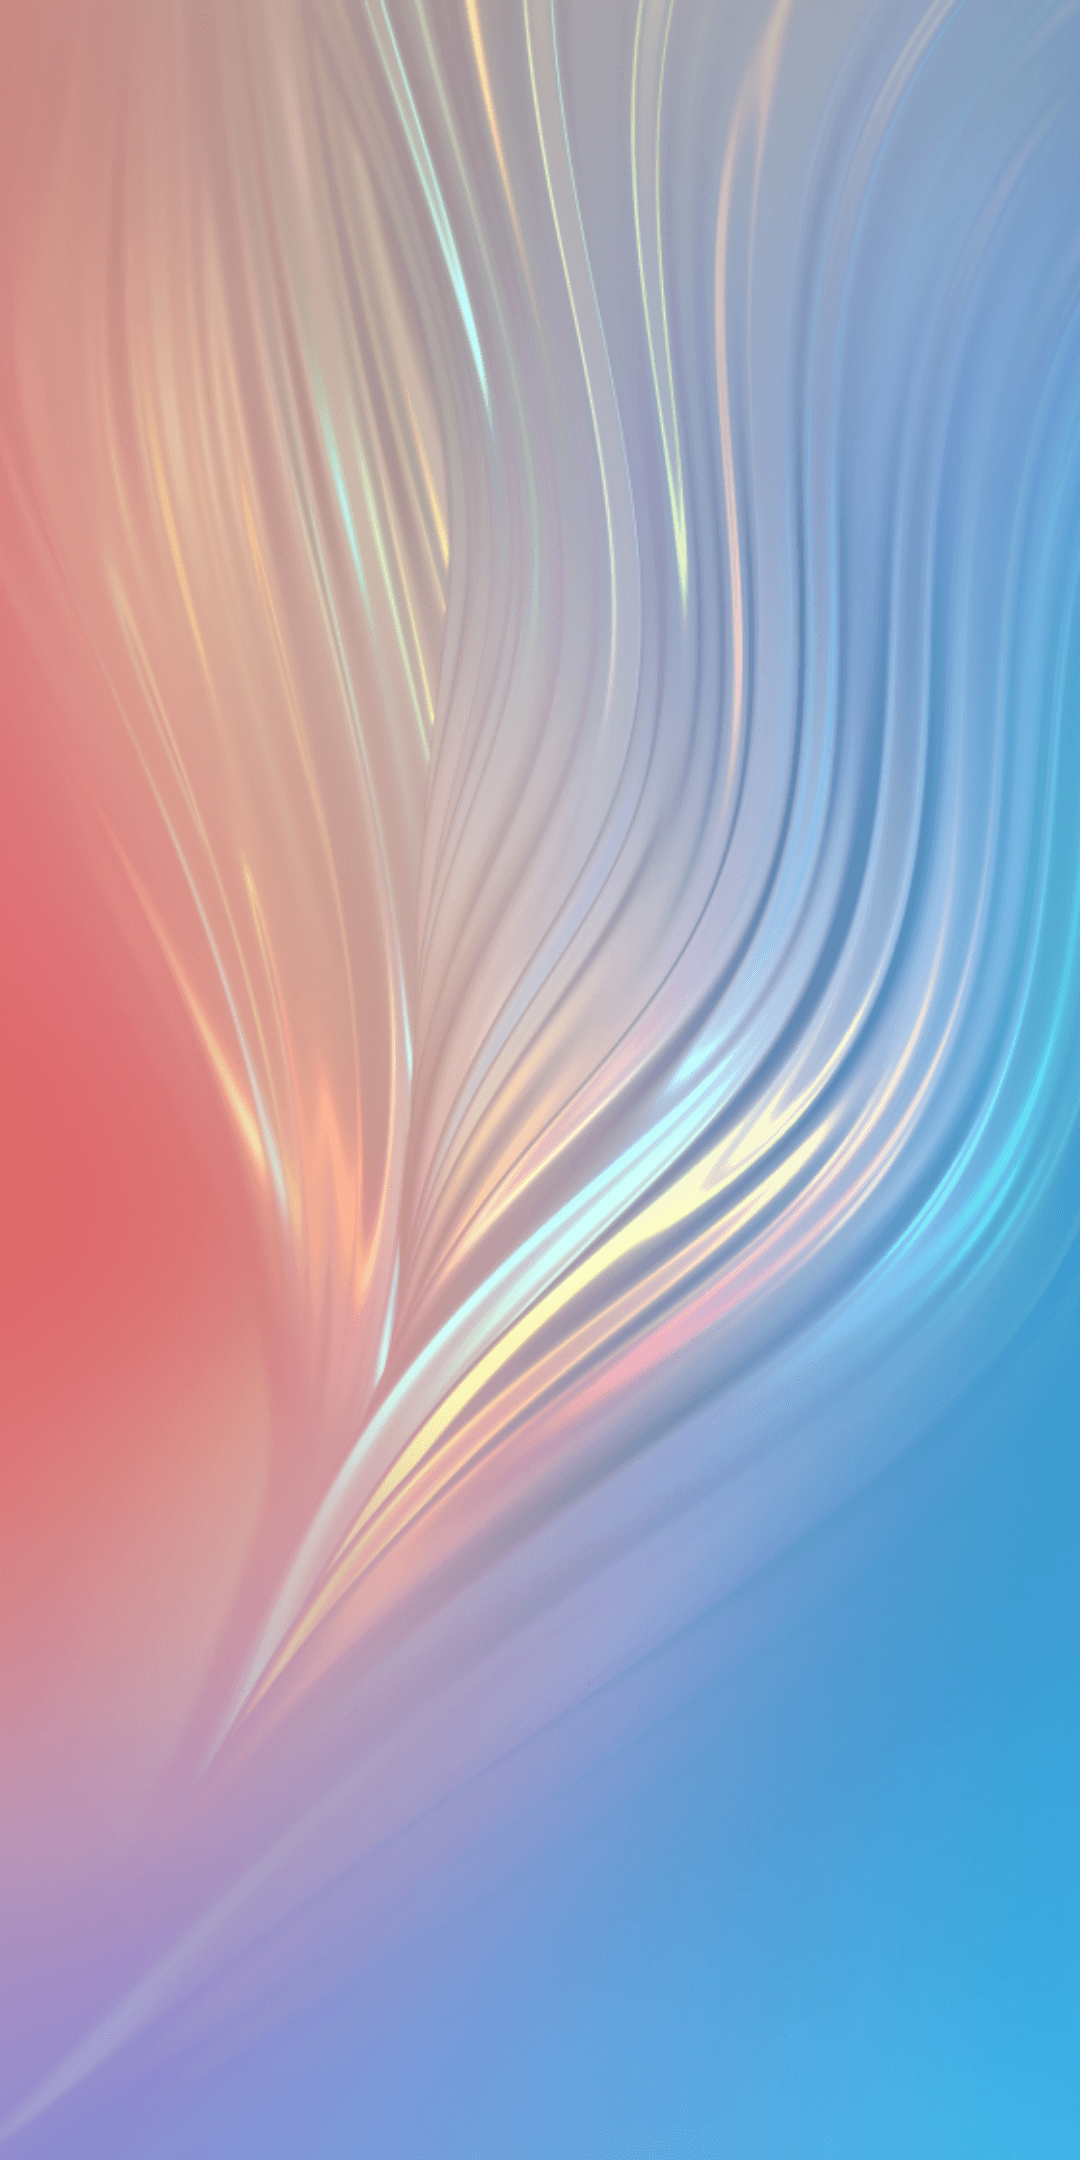 Get the Huawei P wallpapers in full resolution here